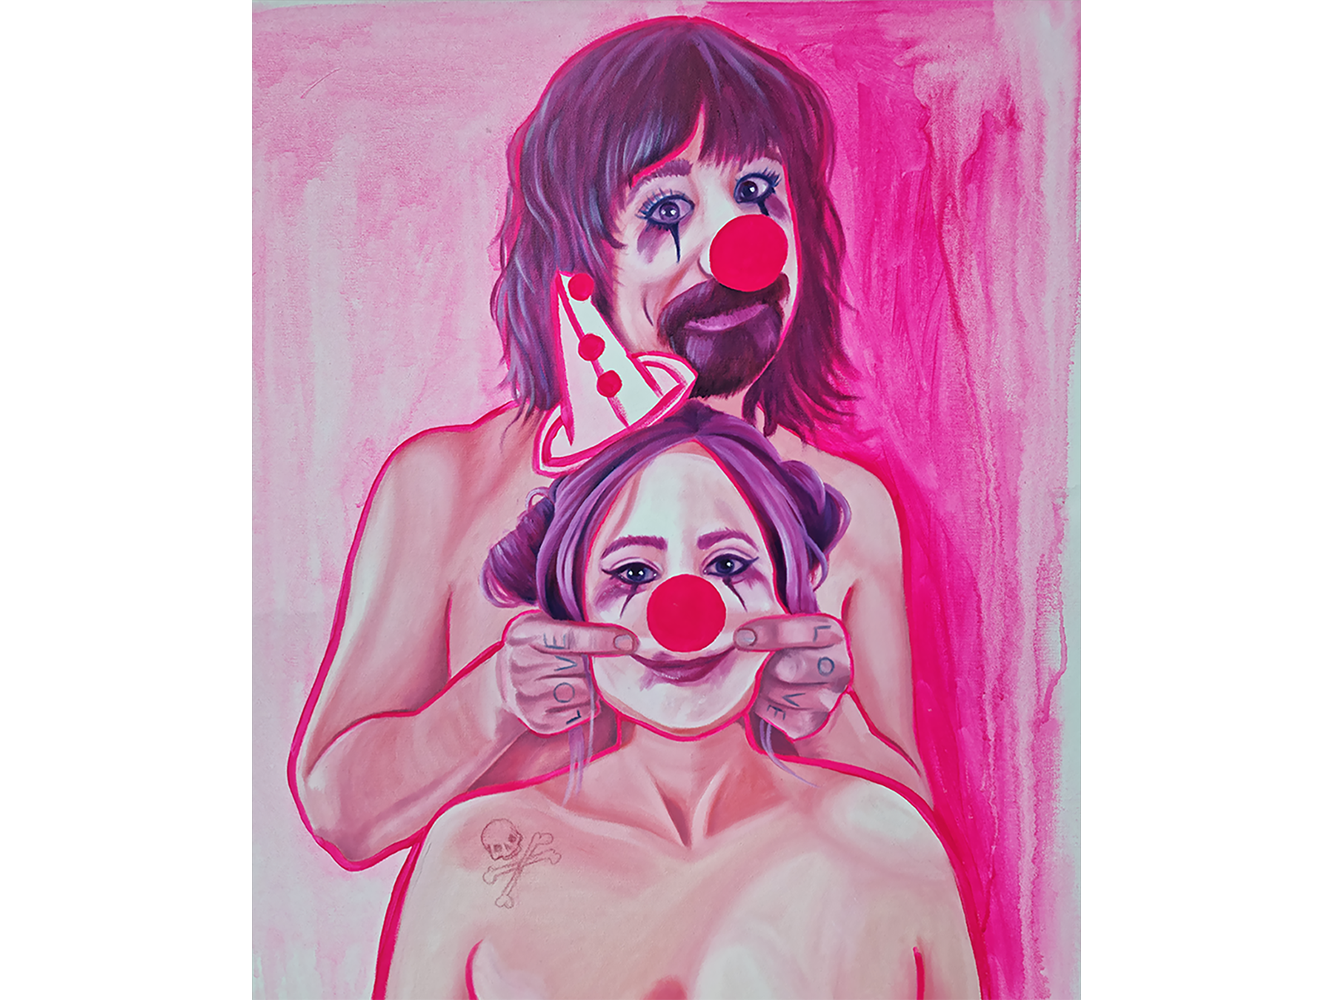 Painting of two people wearing clown make-up